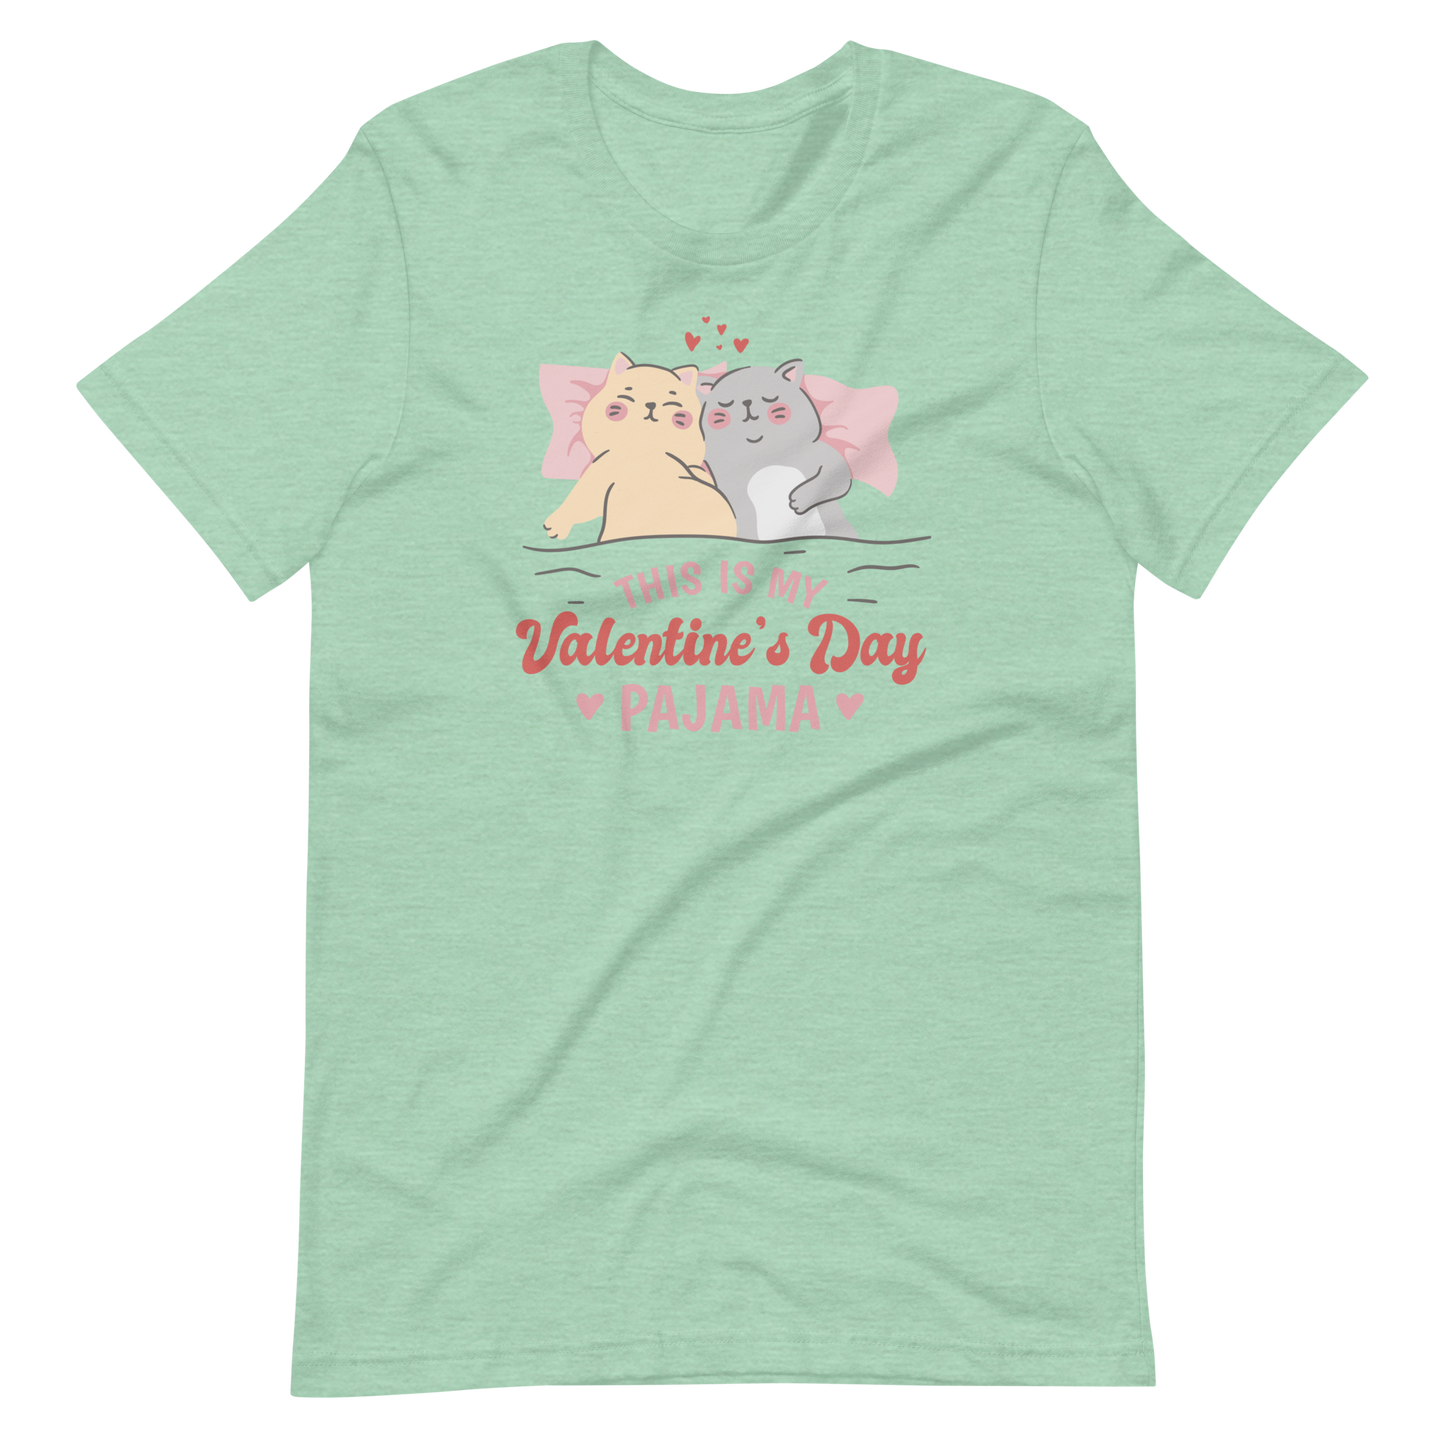 Cute cats sleeping on bed | Unisex t-shirt